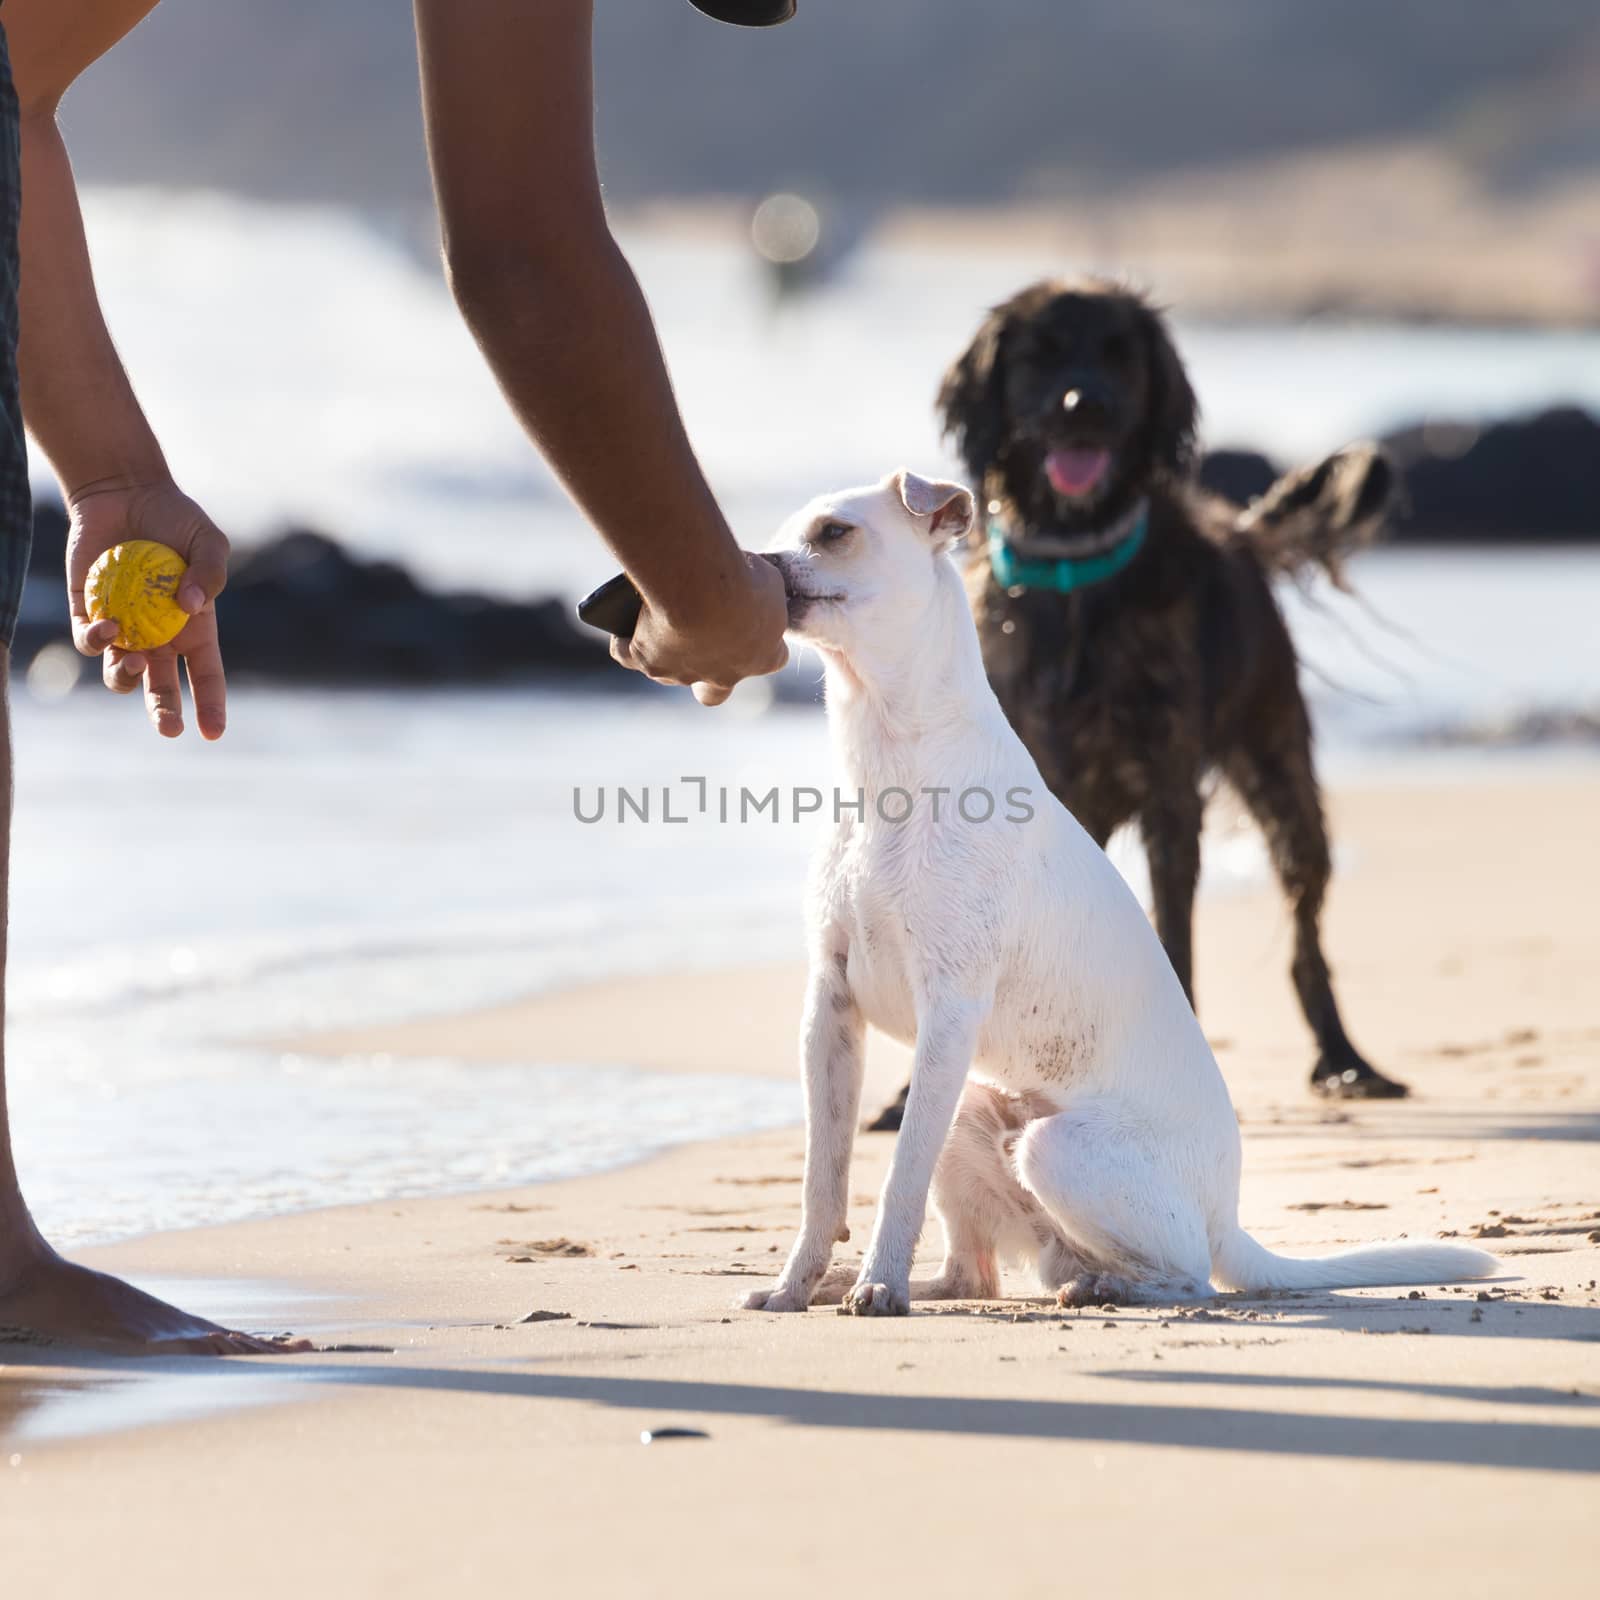 White dog on beach in summer, following his owner, carrying ball.